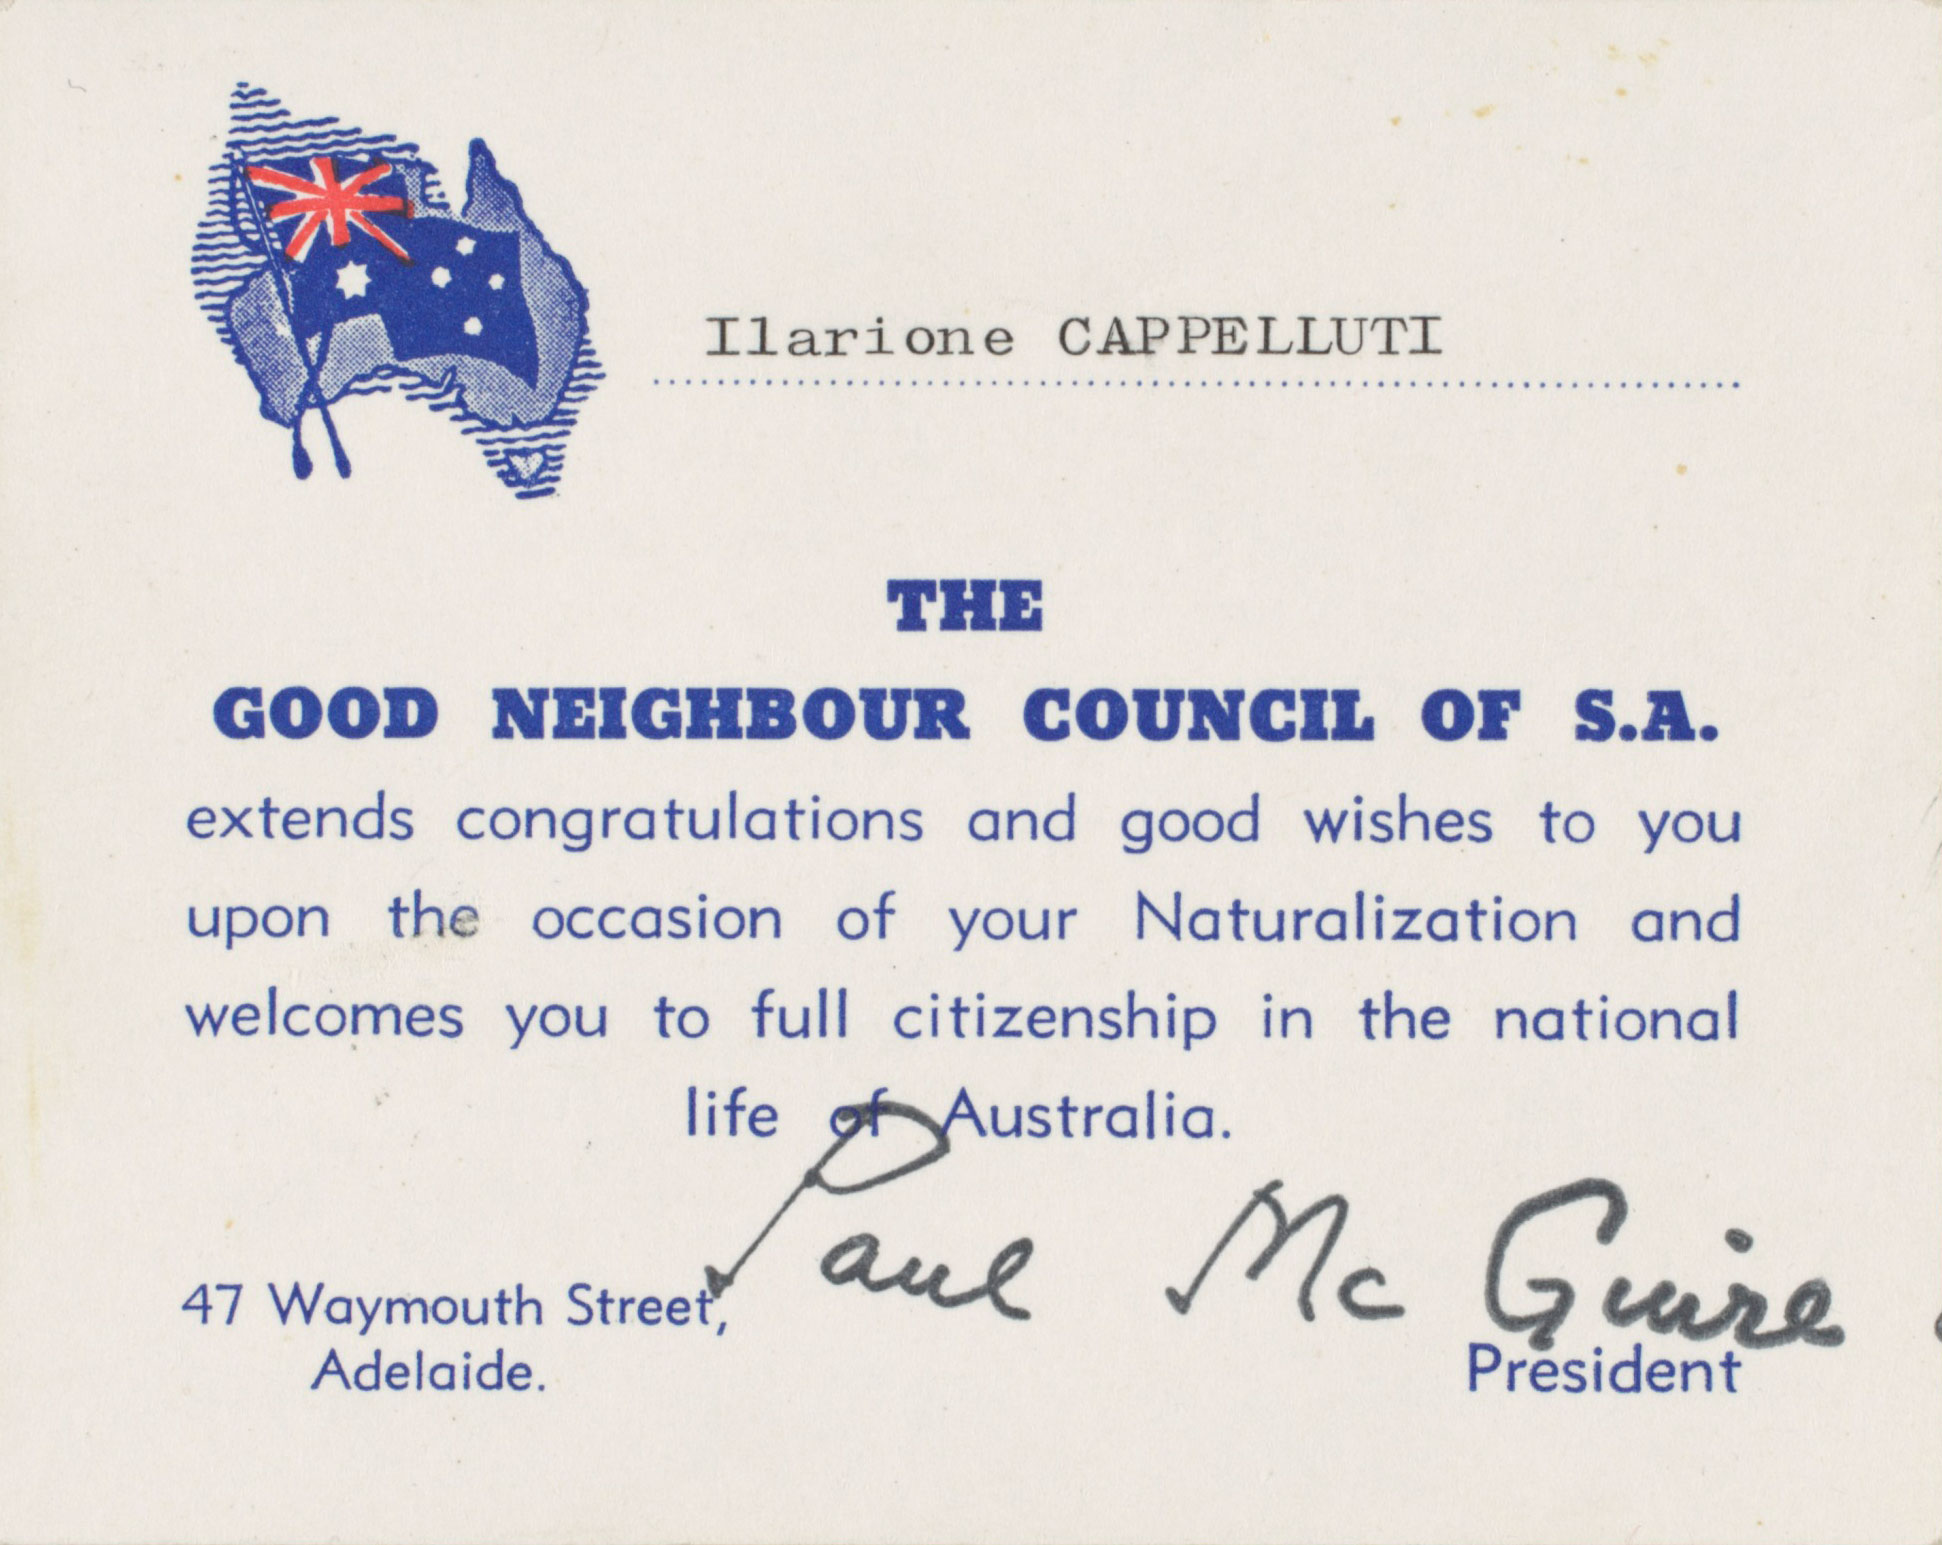 ‘Song of Australia’ card issued to Mr Capelluti after his naturalisation, 1962.